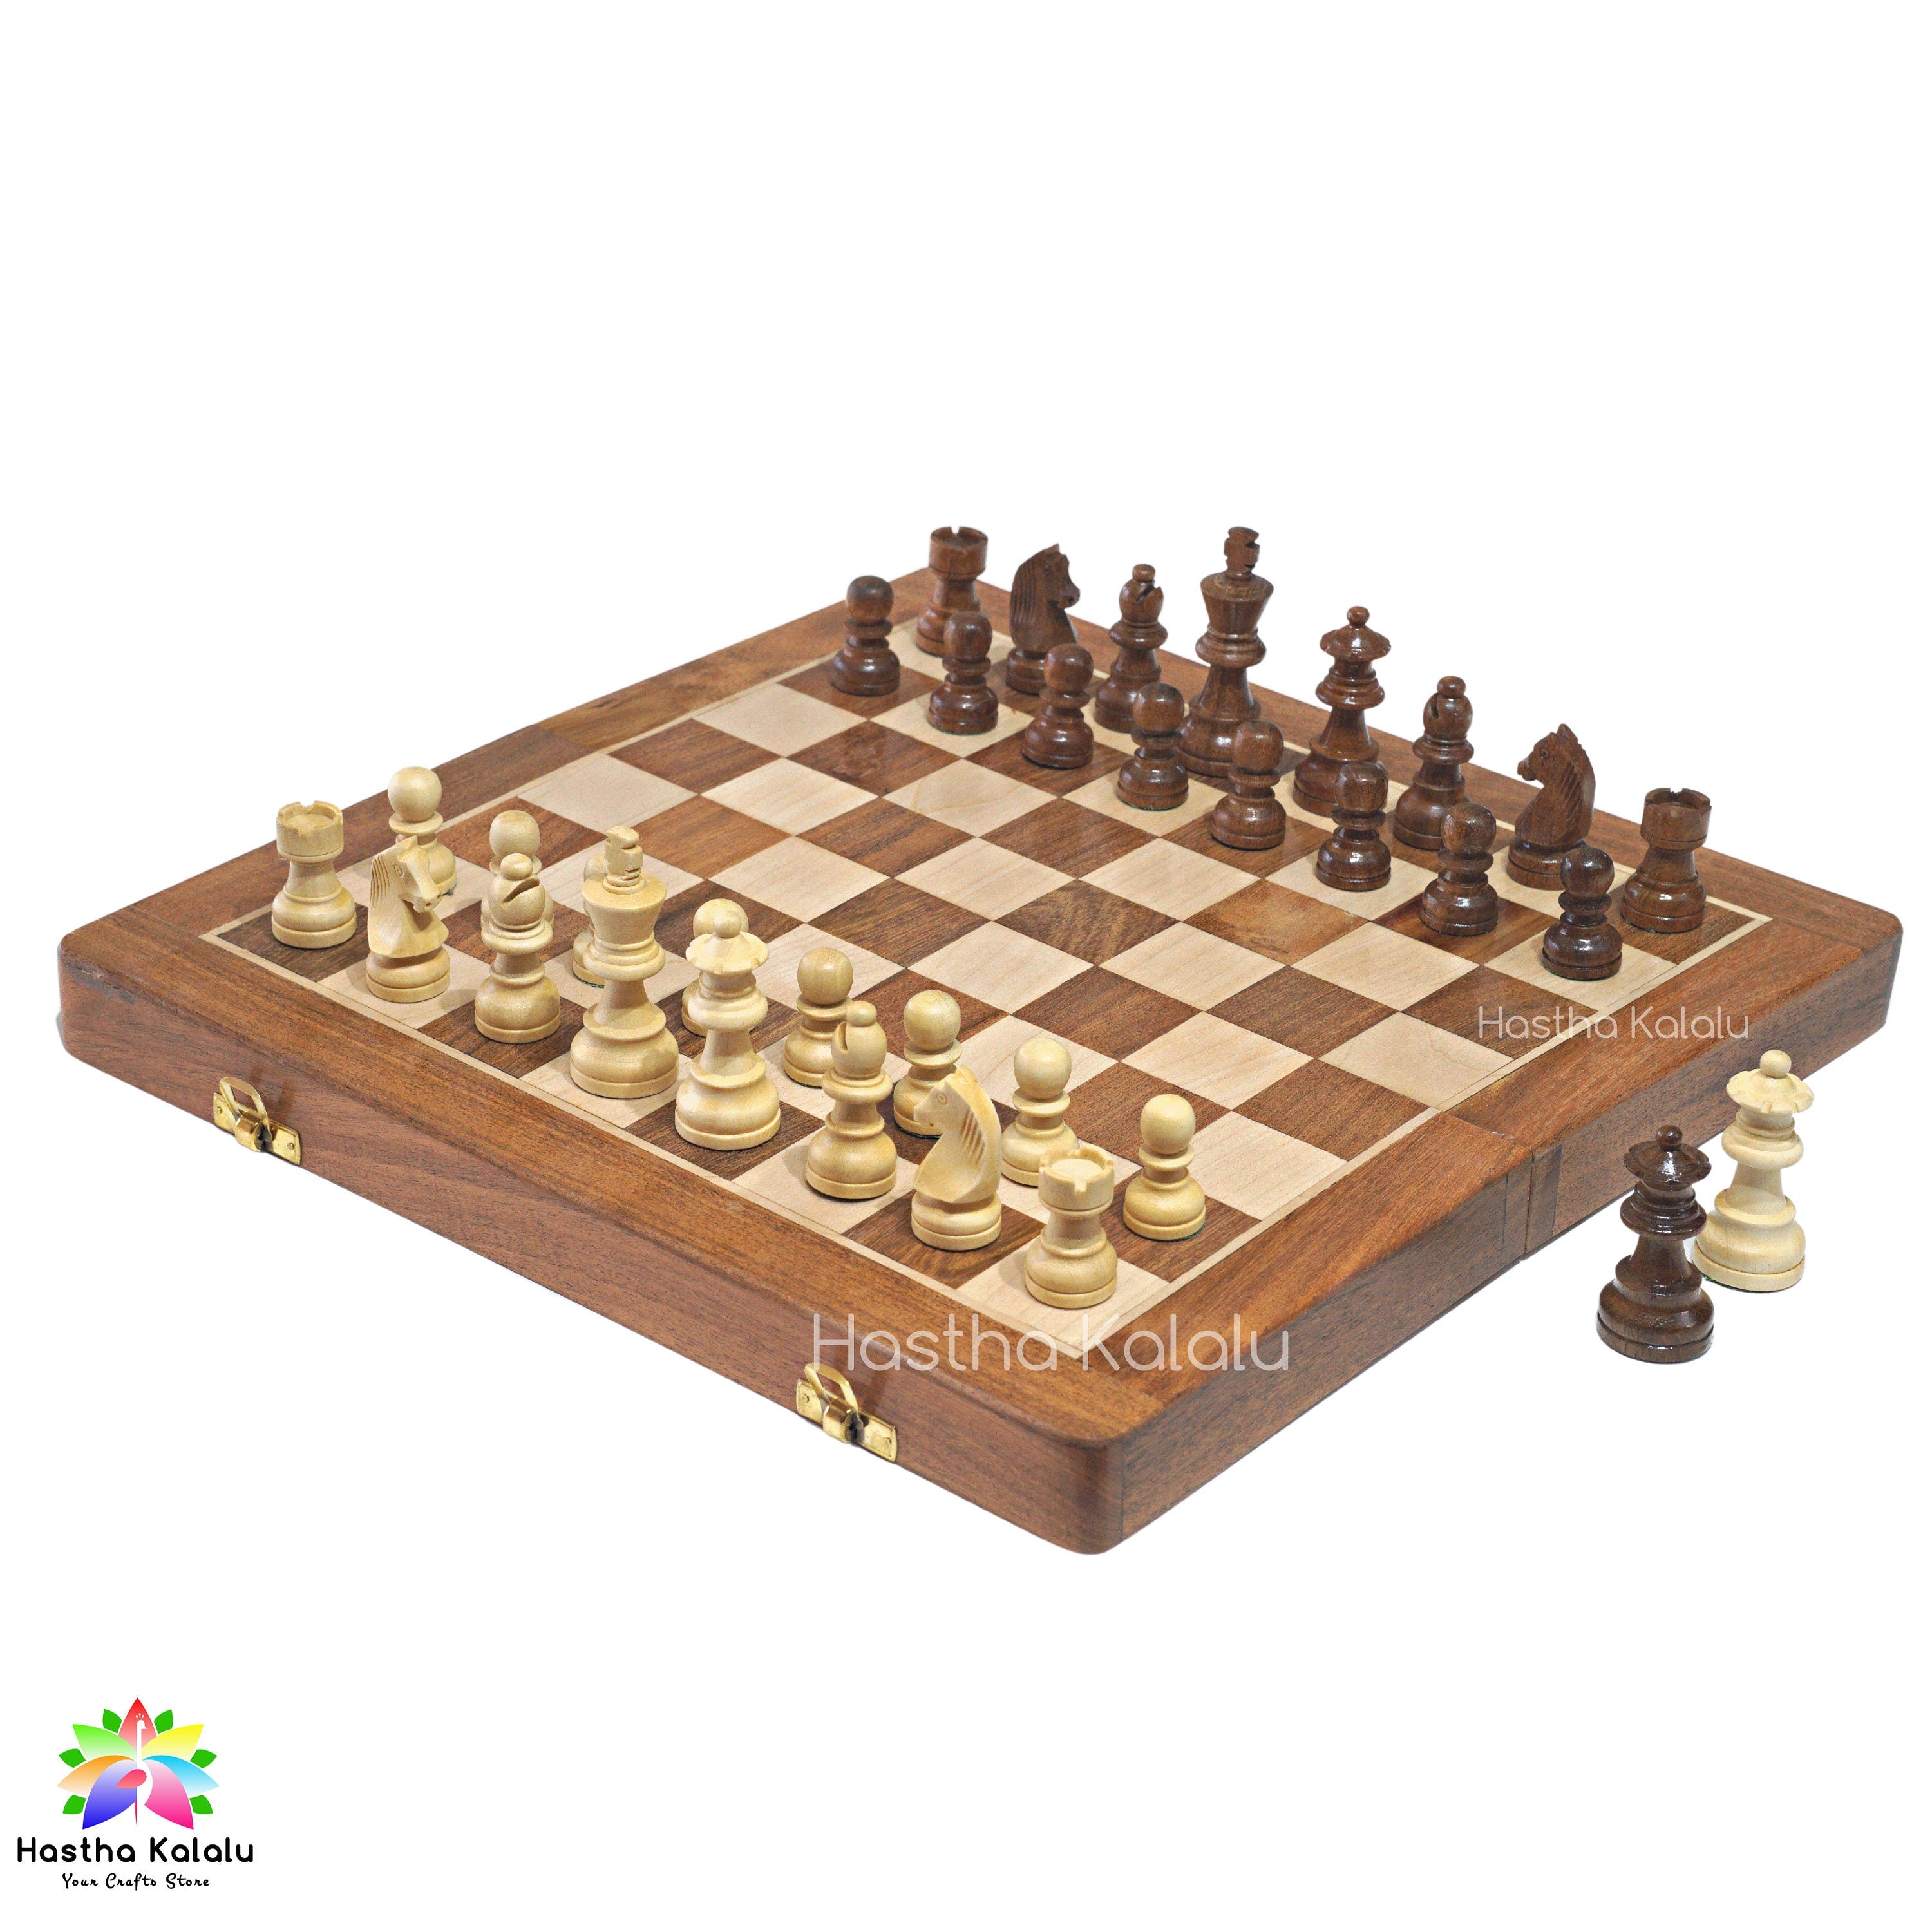 Magnetic Travel Chess Set with Board and Stoarge, Handmade Chess Set, Tournamnet Chess Set with Extra queens, Foldable Chess Board